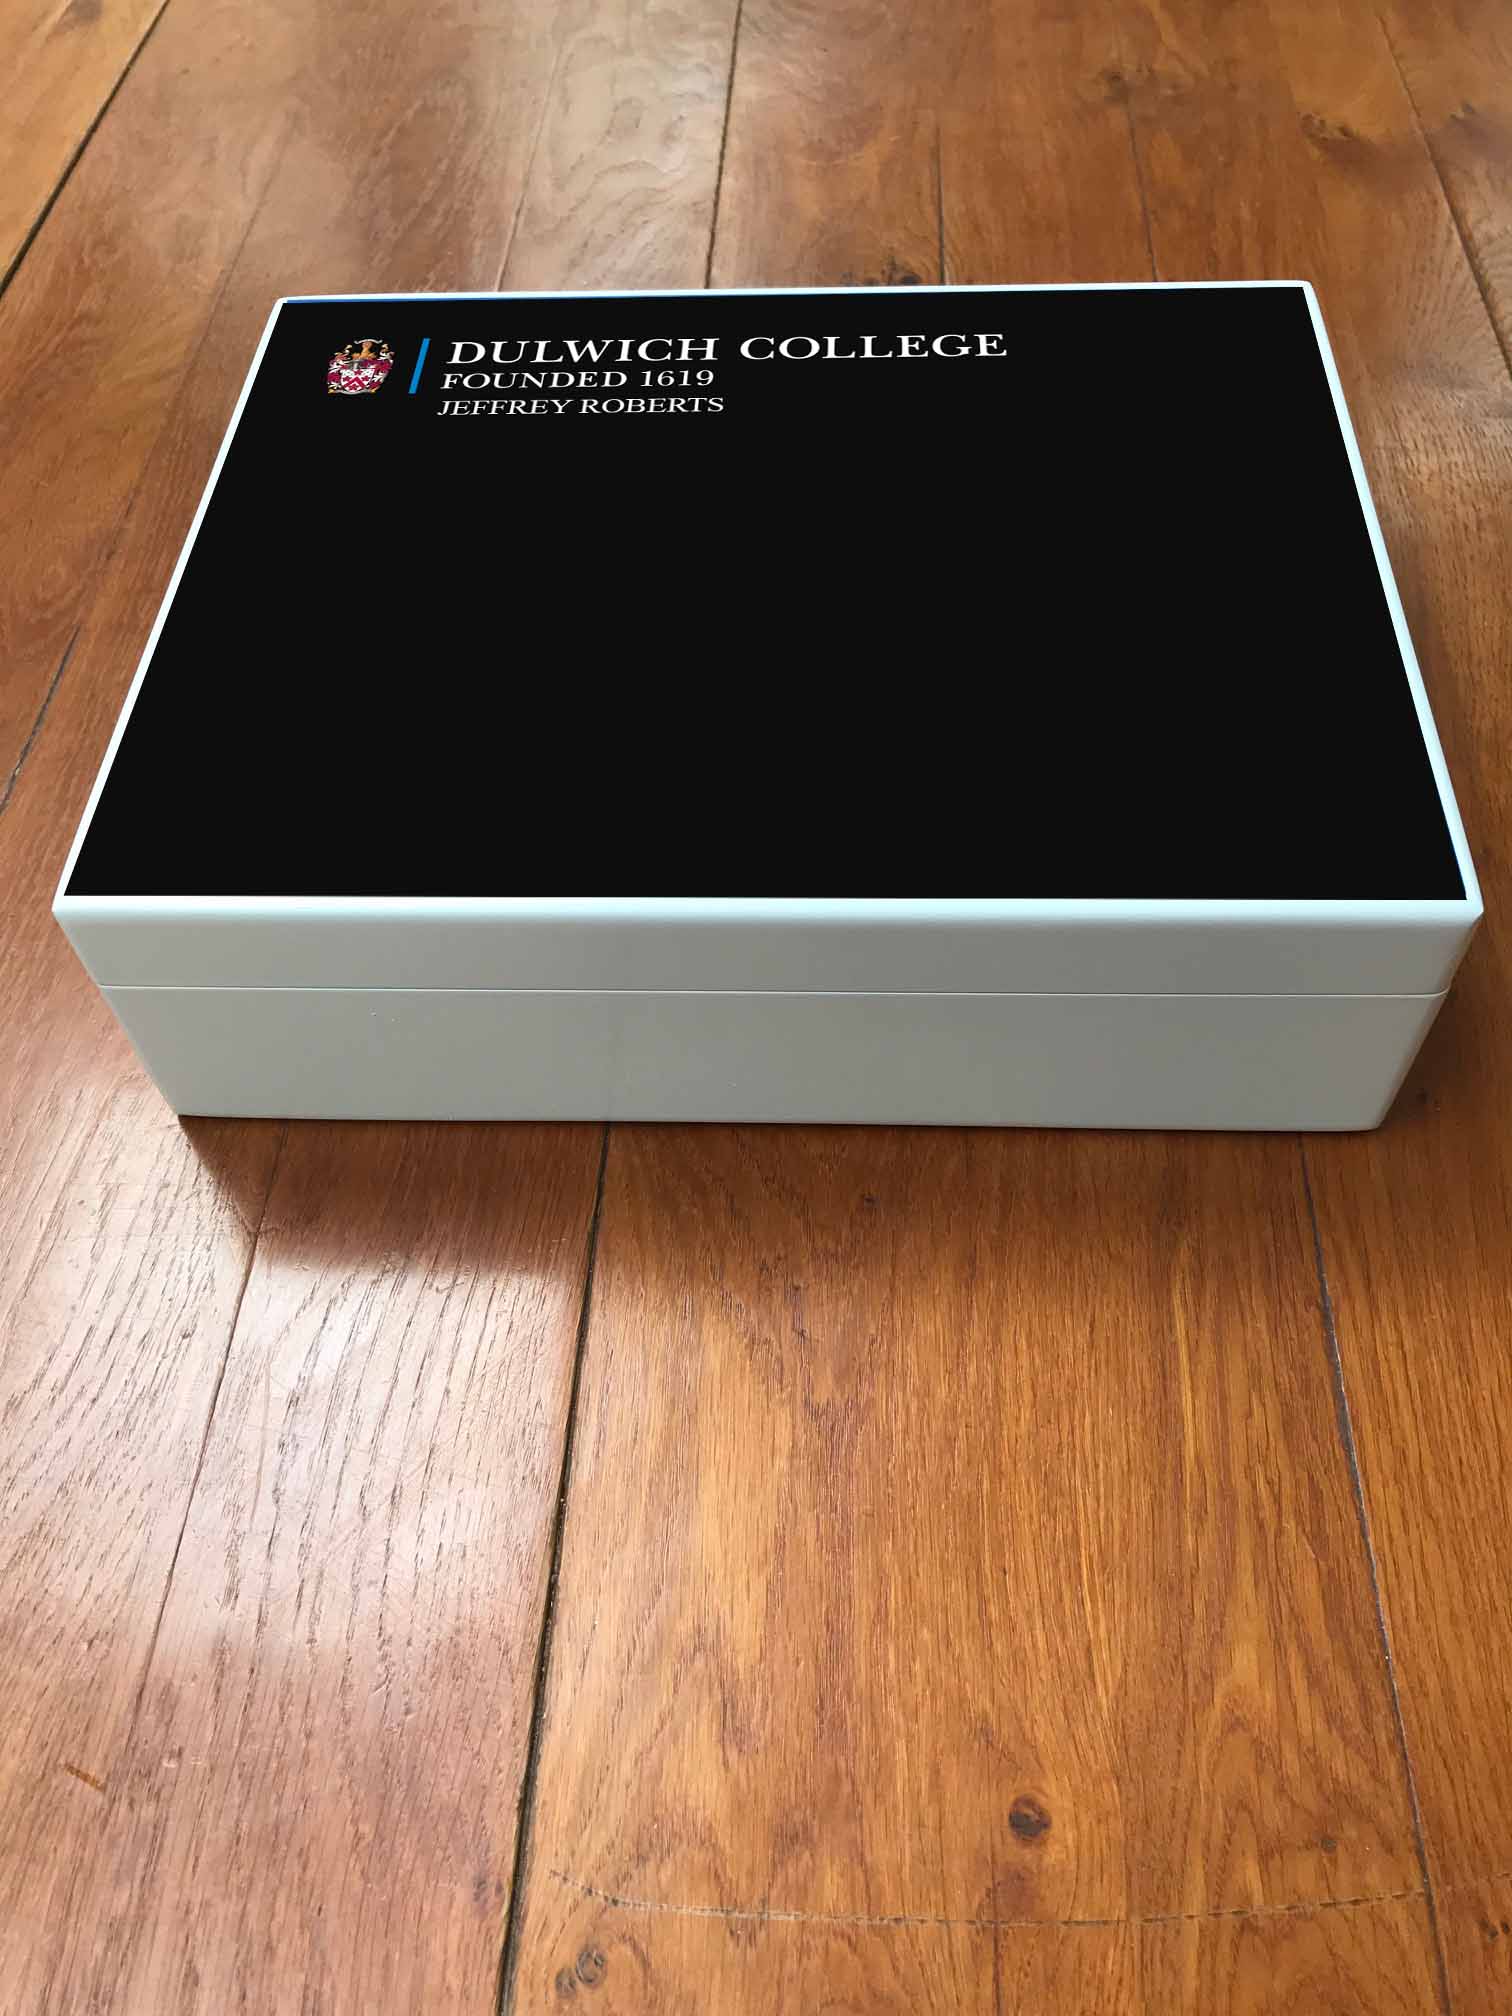 A4 Box - Personalised Dulwich College School Memory Wood Box